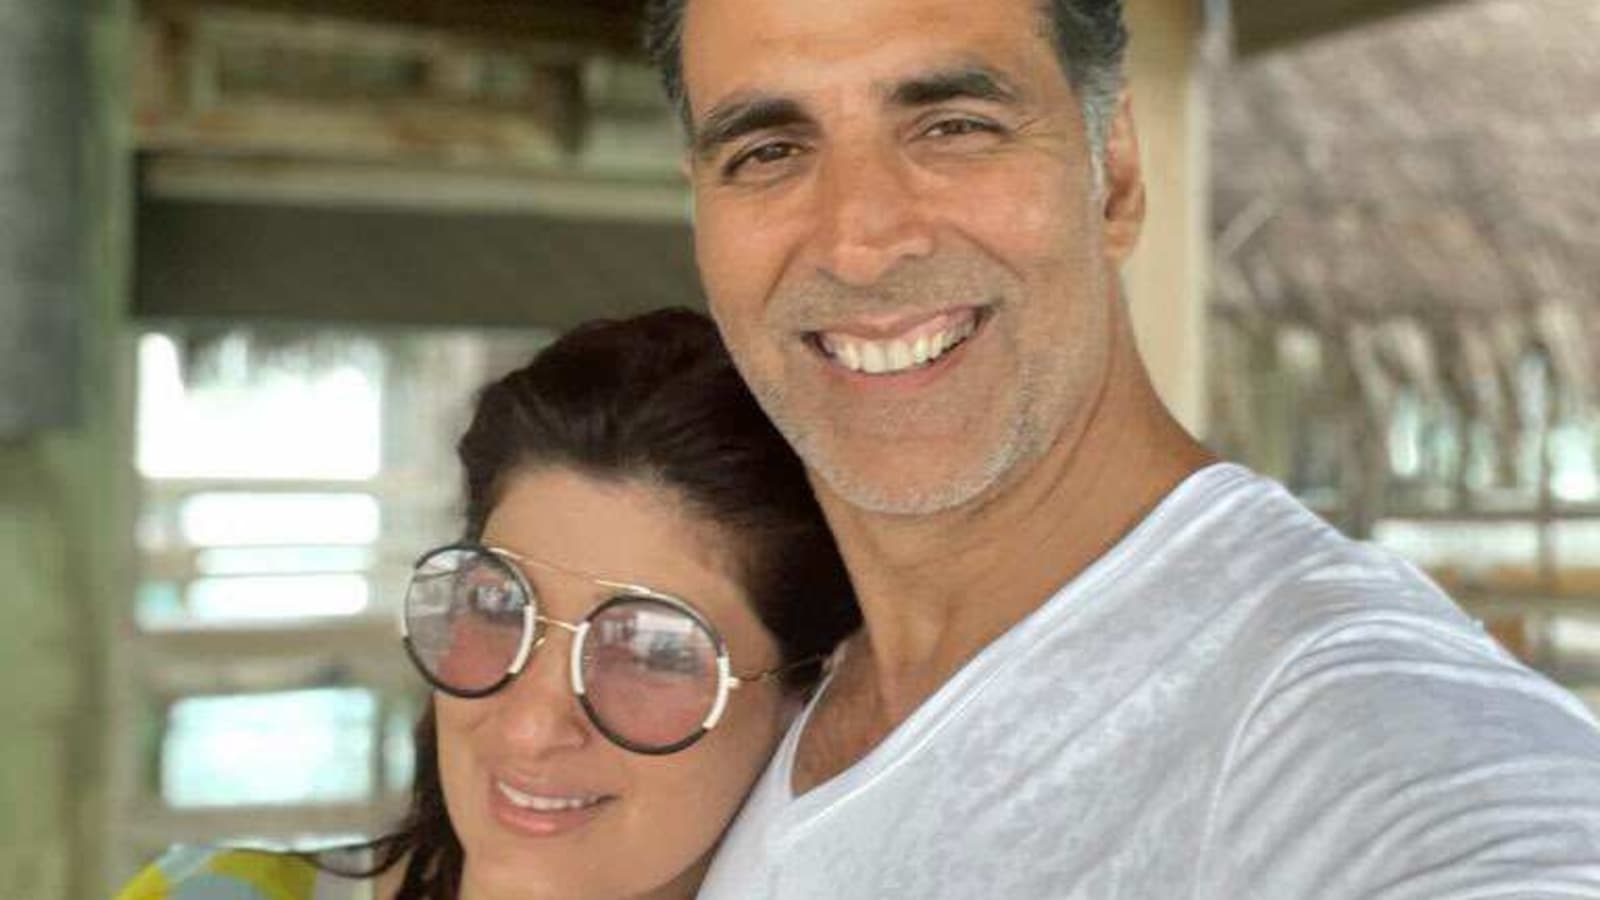 Akshay Kumar And Twinkle Khanna Show Their Happy Faces In Romantic Selfie From Beach Holiday